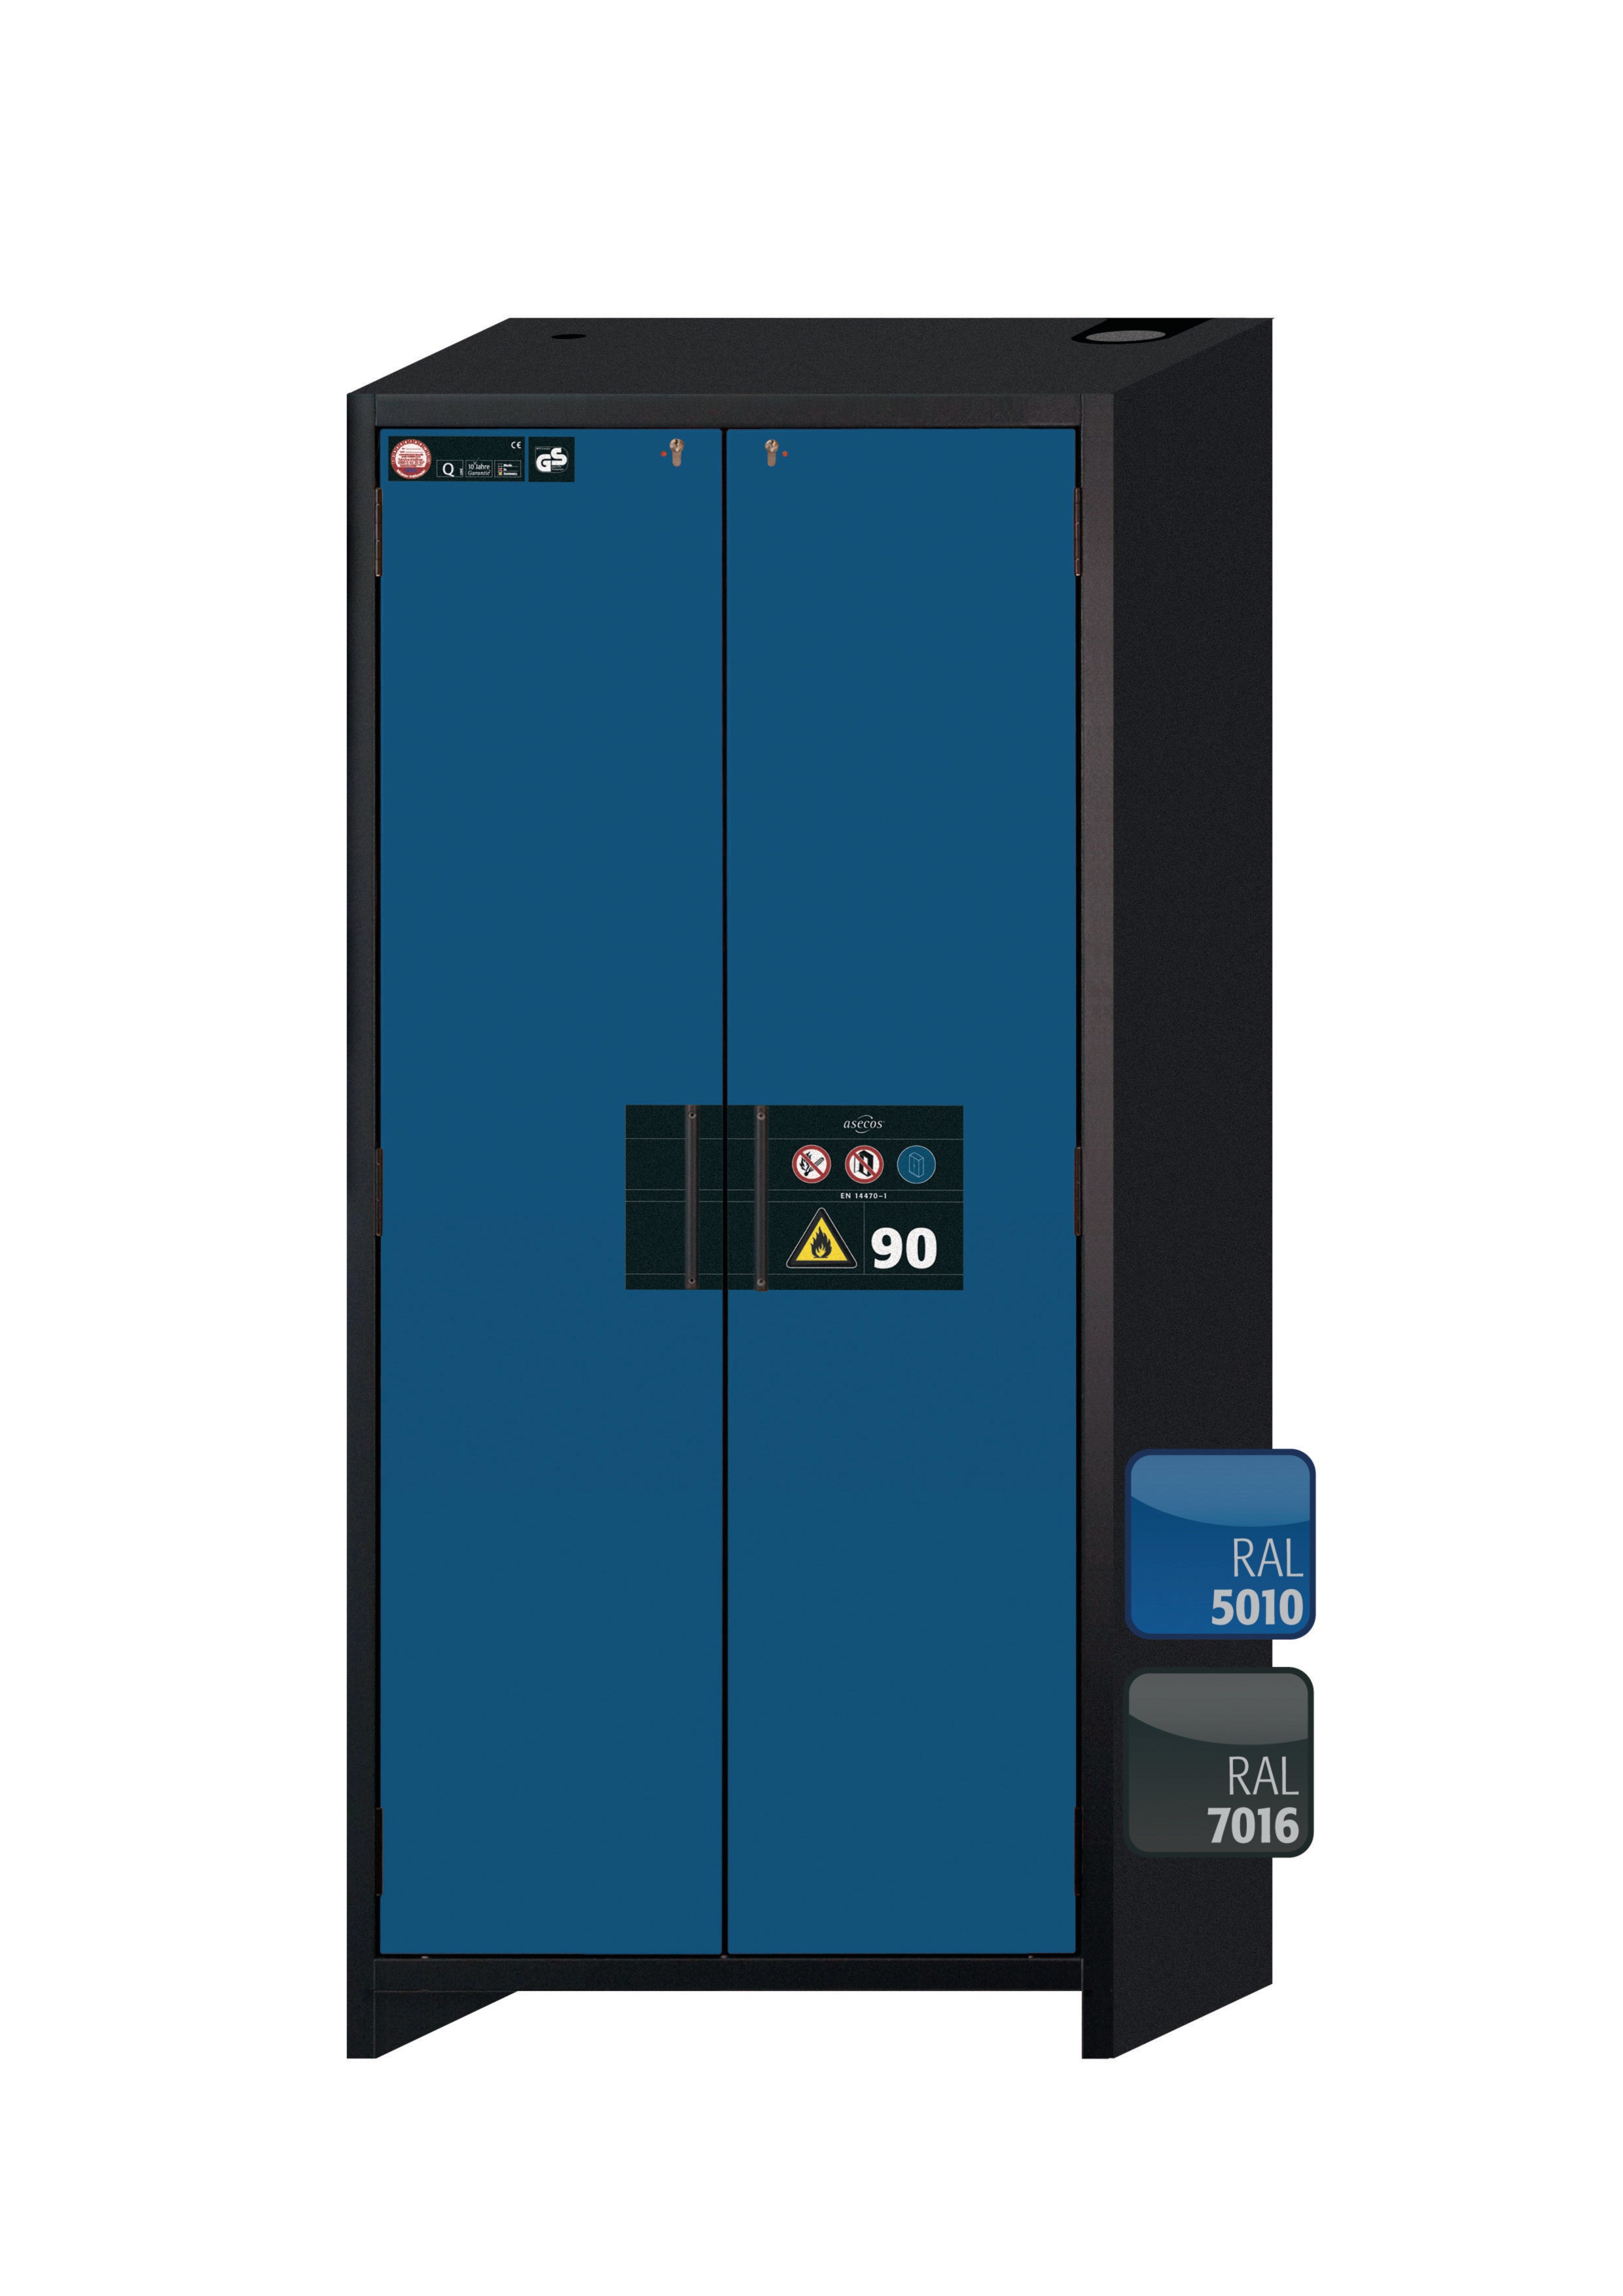 Type 90 safety storage cabinet Q-CLASSIC-90 model Q90.195.090 in gentian blue RAL 5010 with 5x drawer (standard) (stainless steel 1.4301),